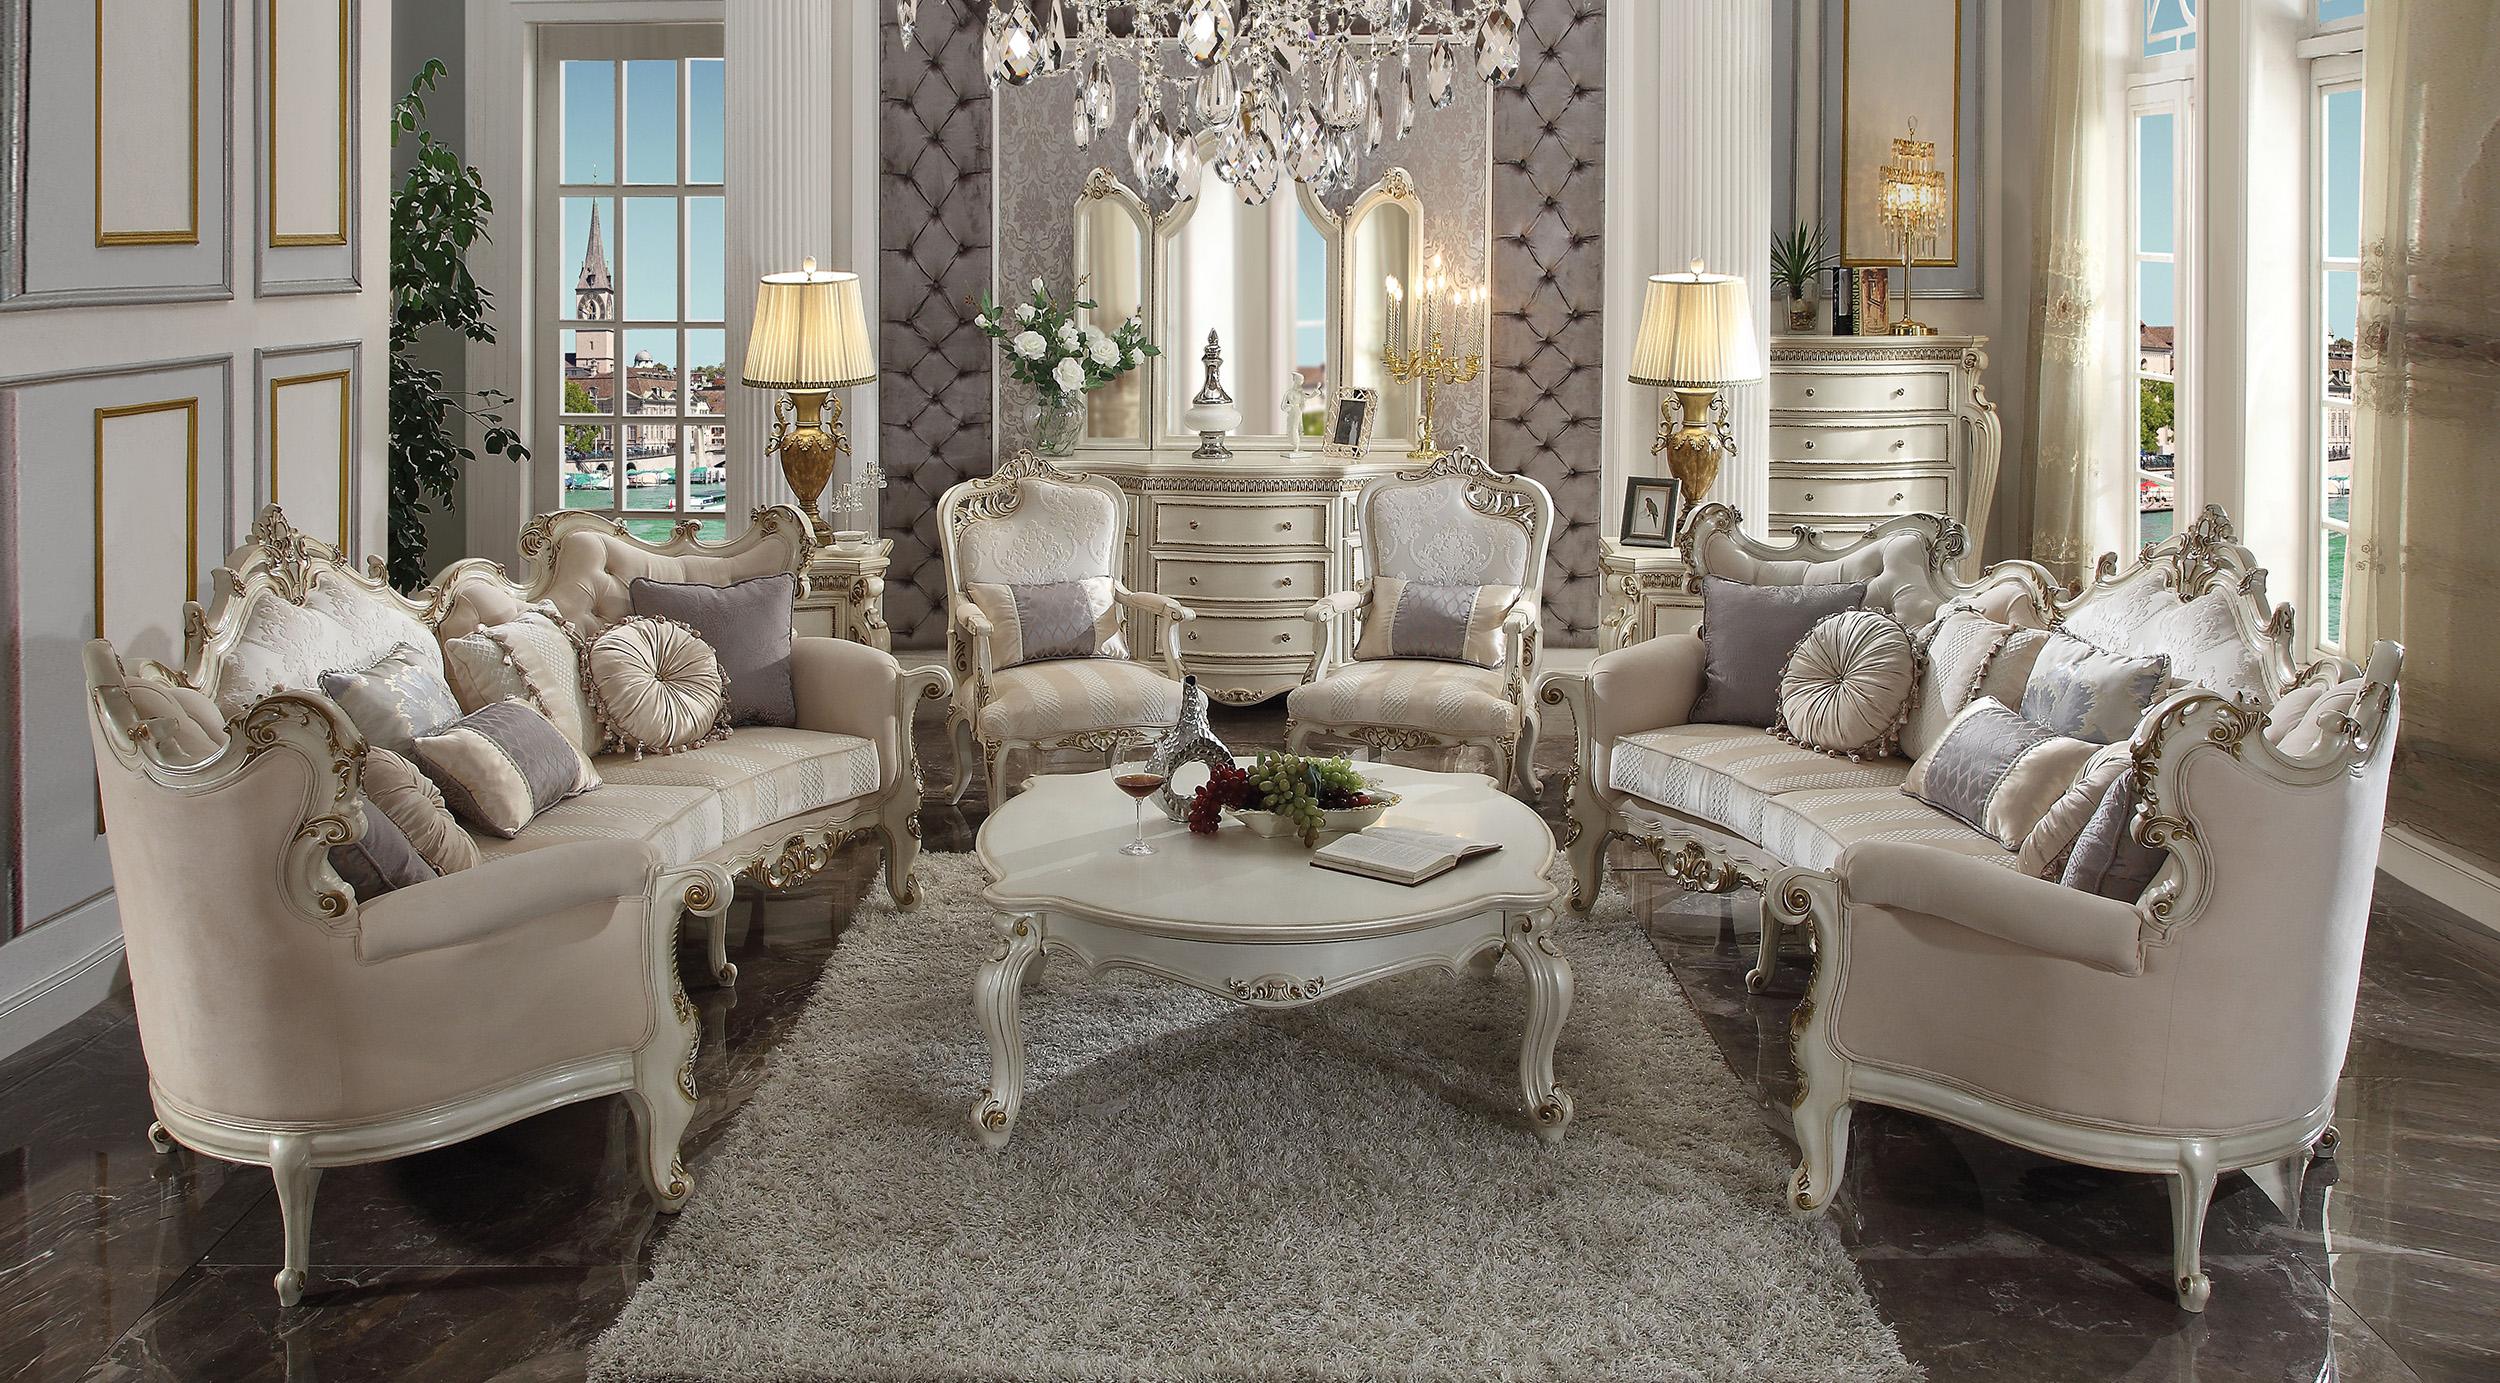 Classic, Traditional Sofa Set Picardy II 56880 56880-Set-4-Picardy II in Pearl, Antique Fabric